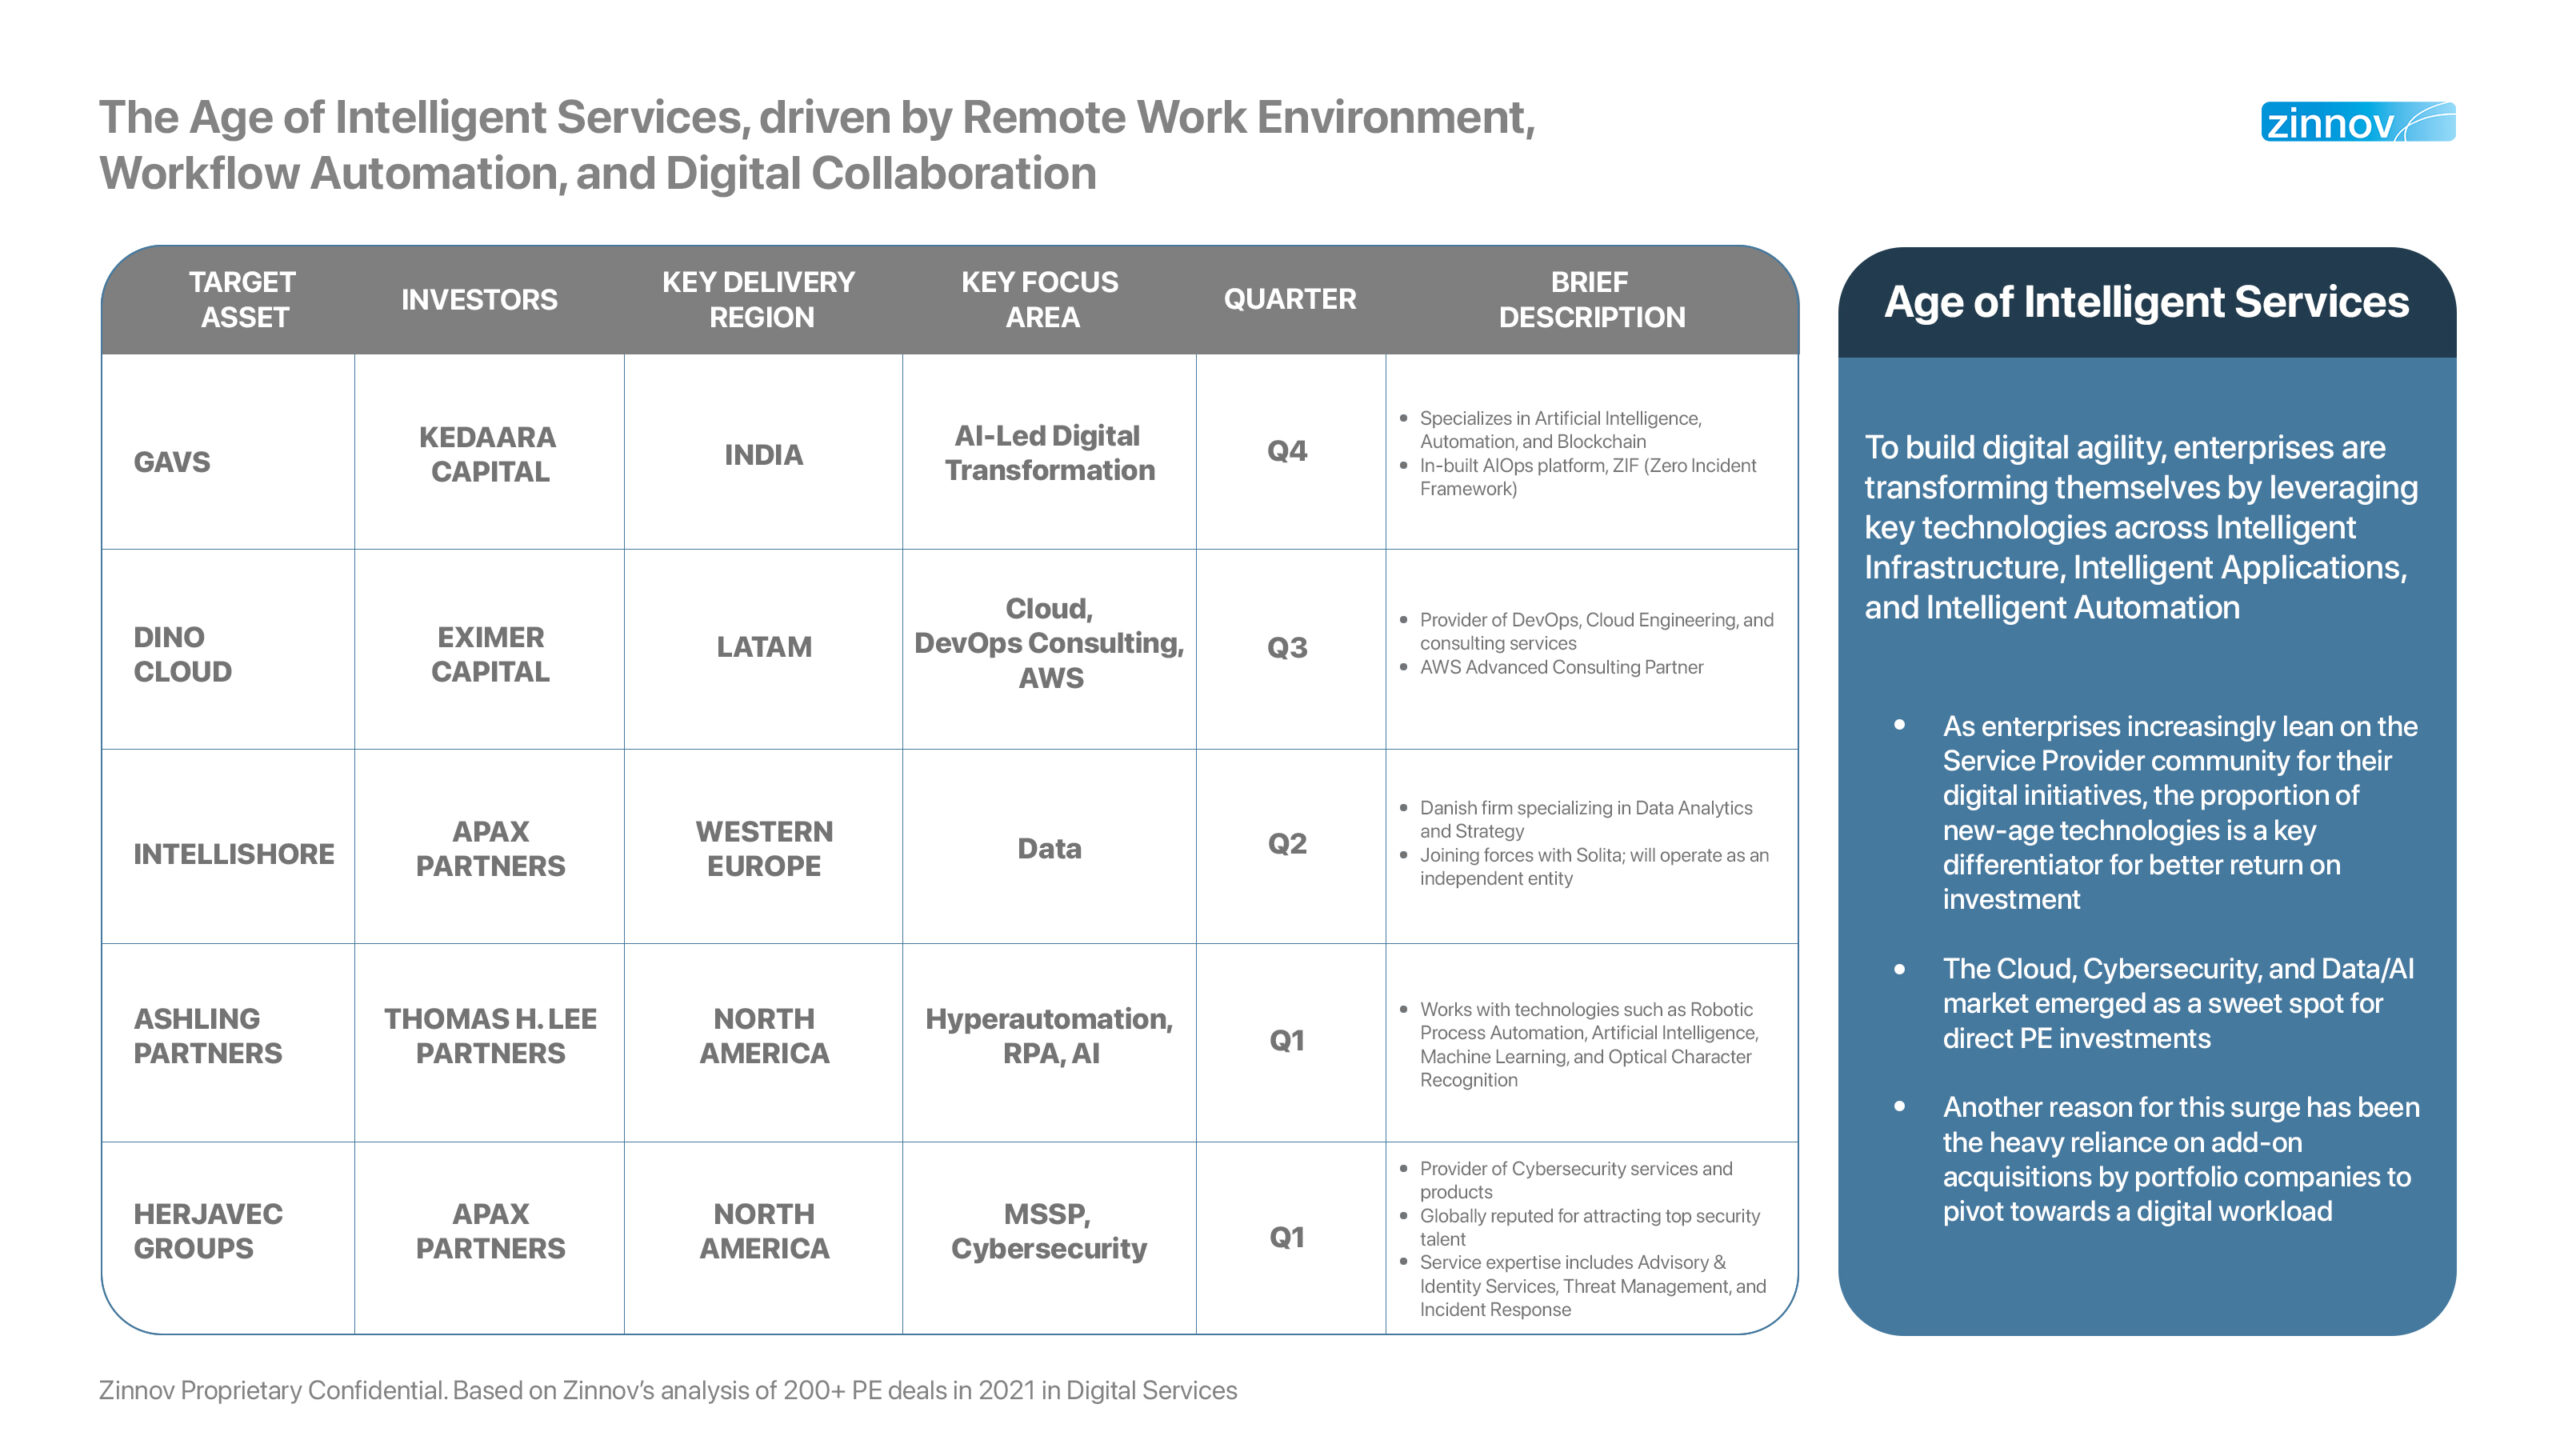 The age of Intelligent Services driven by remote work environment, workflow automation and digital collaboration